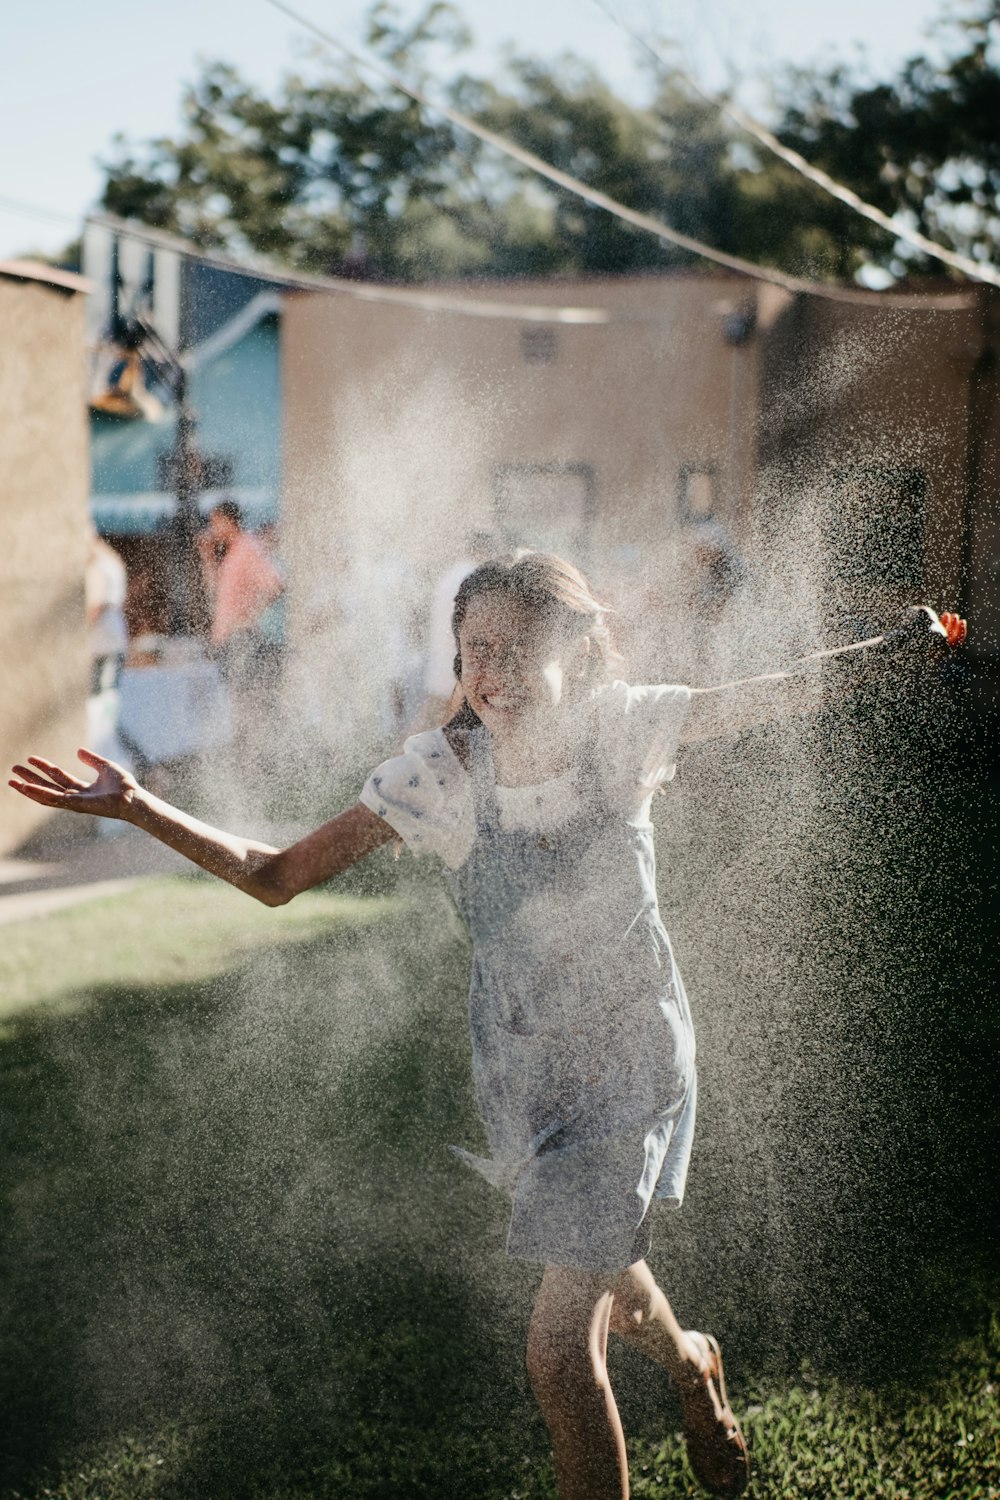 girl in white t-shirt playing with bubbles